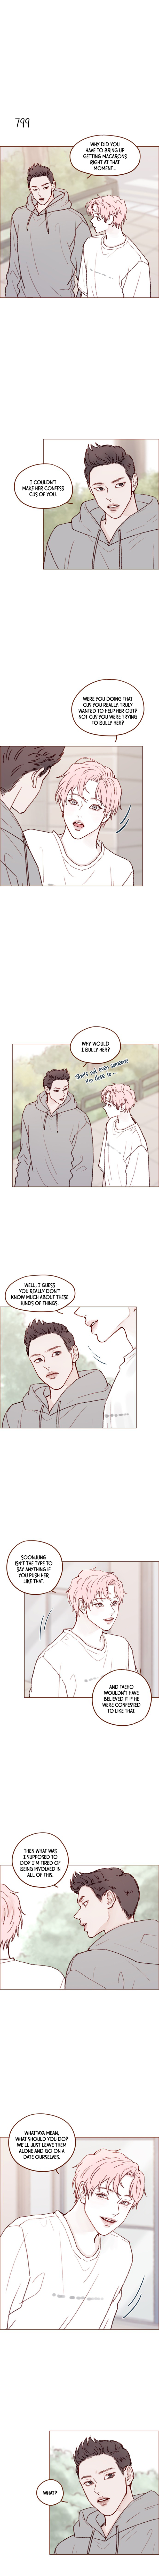 Hongshi Loves Me! Chapter 127: She Said She Has Something She Wants To Say To You. - Picture 3